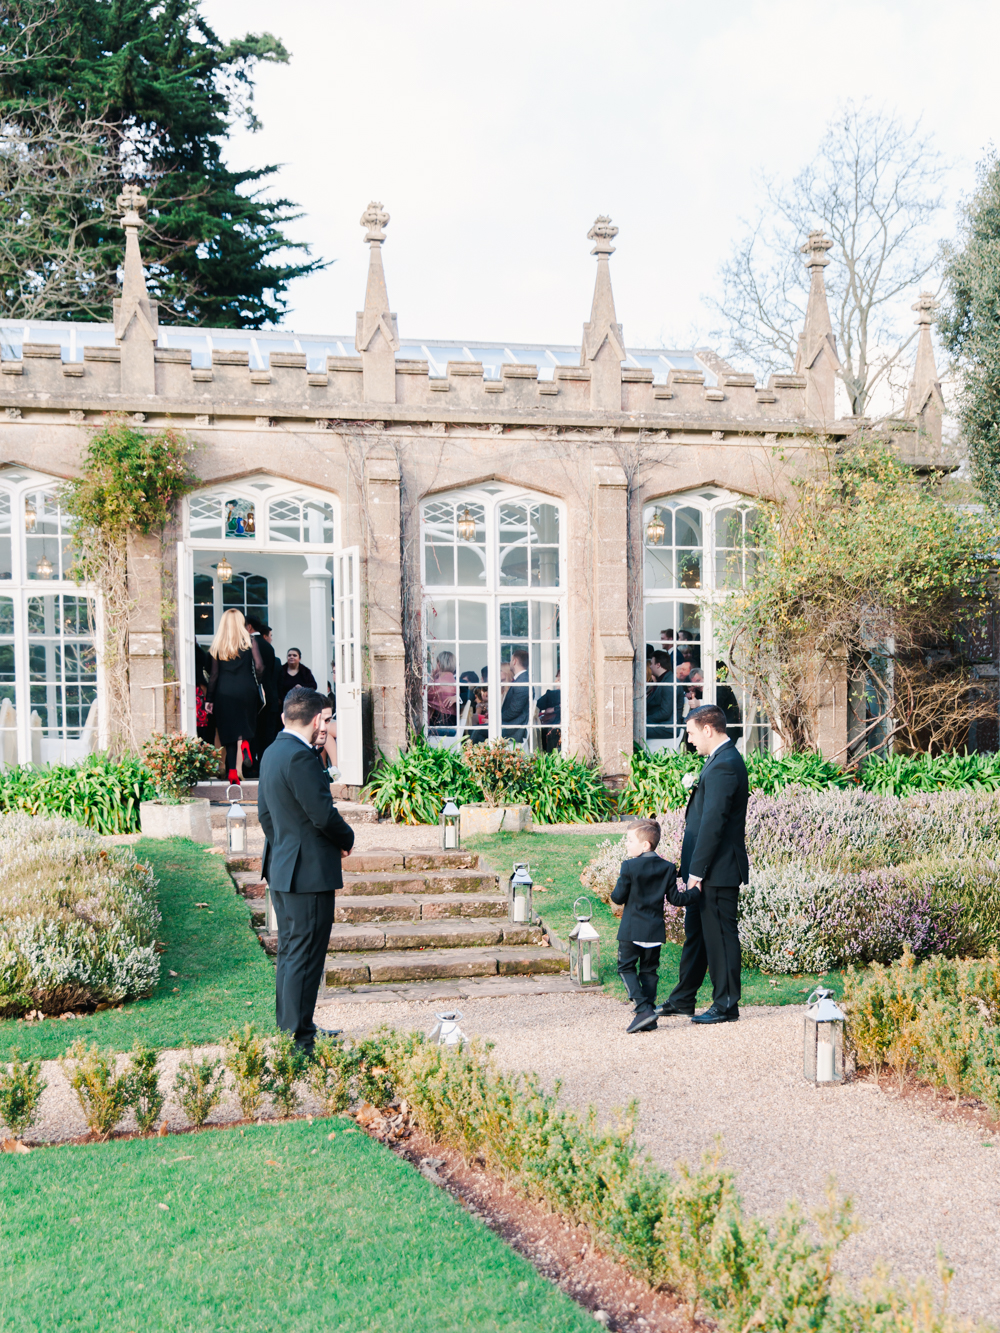 Wedding guests wait outside the orangery in the garden of St Audries Park